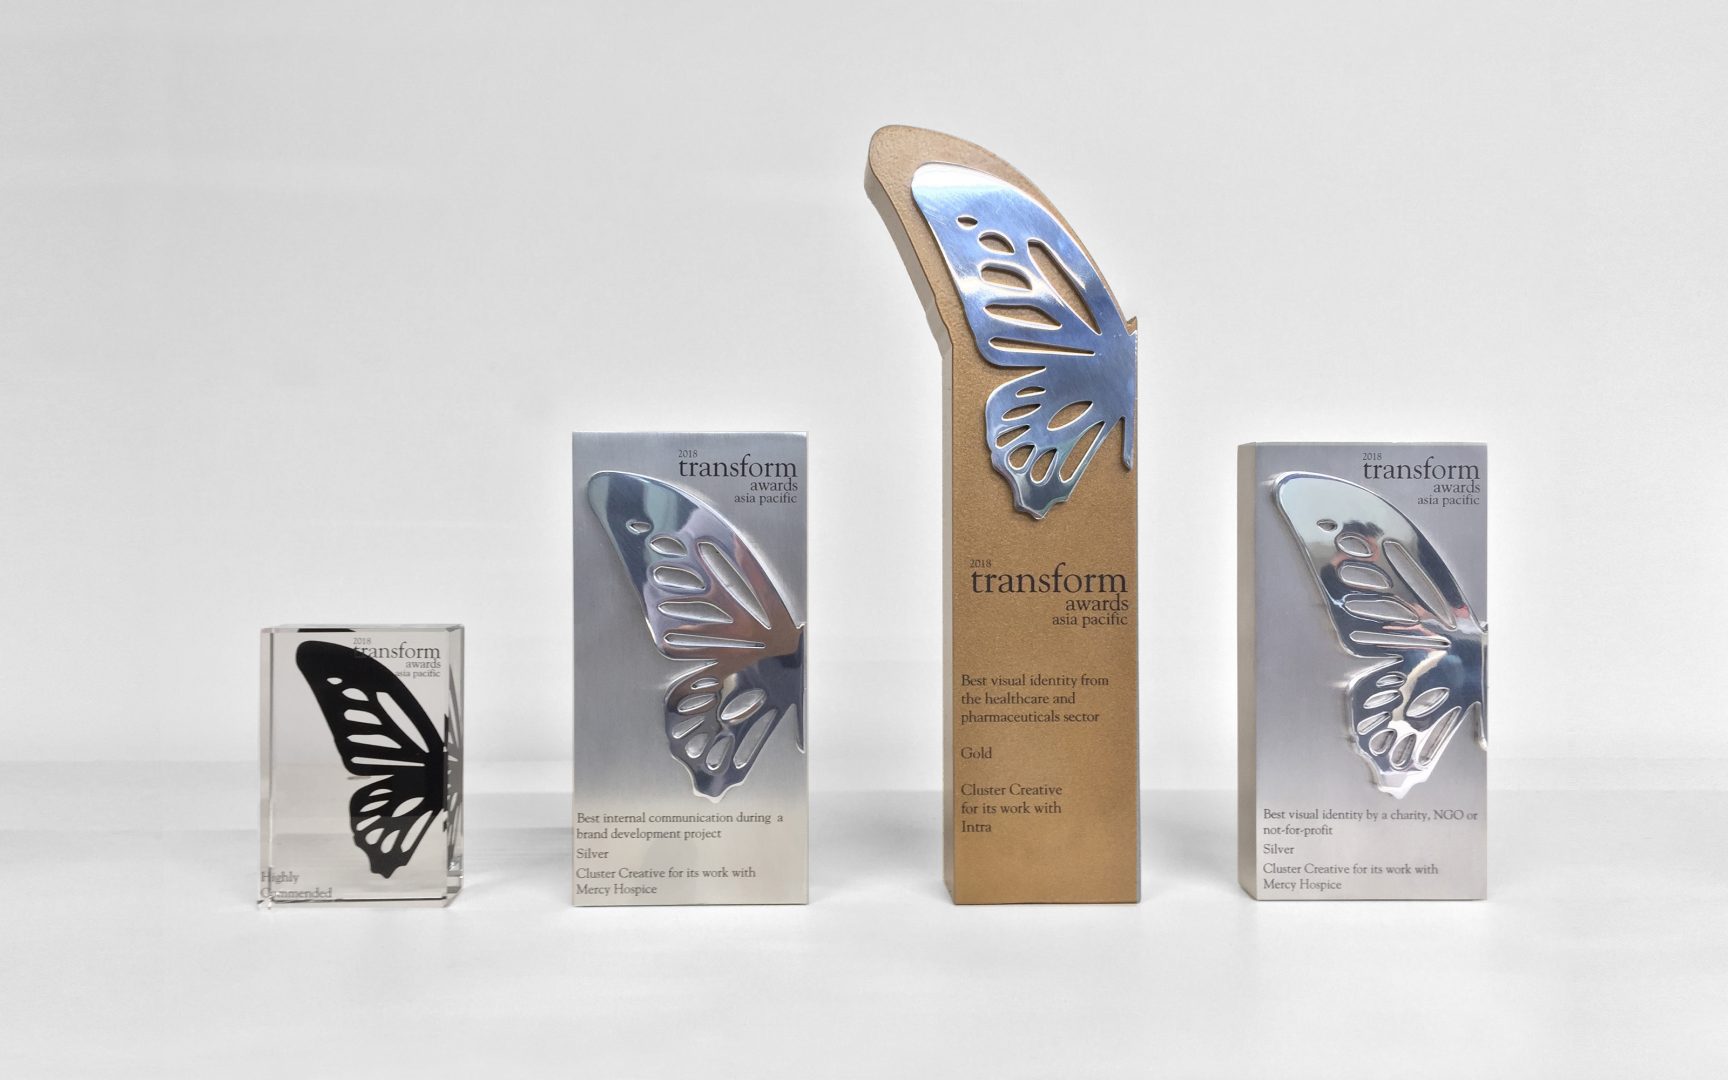 Re:brand has won gold at the prestigious Transform Awards Asia Pacific 2018 in Hong Kong. “This year, the calibre of submission has been phenomenal, and the clients and agencies that have won have demonstrated outstanding creative ability and strategic insight”.